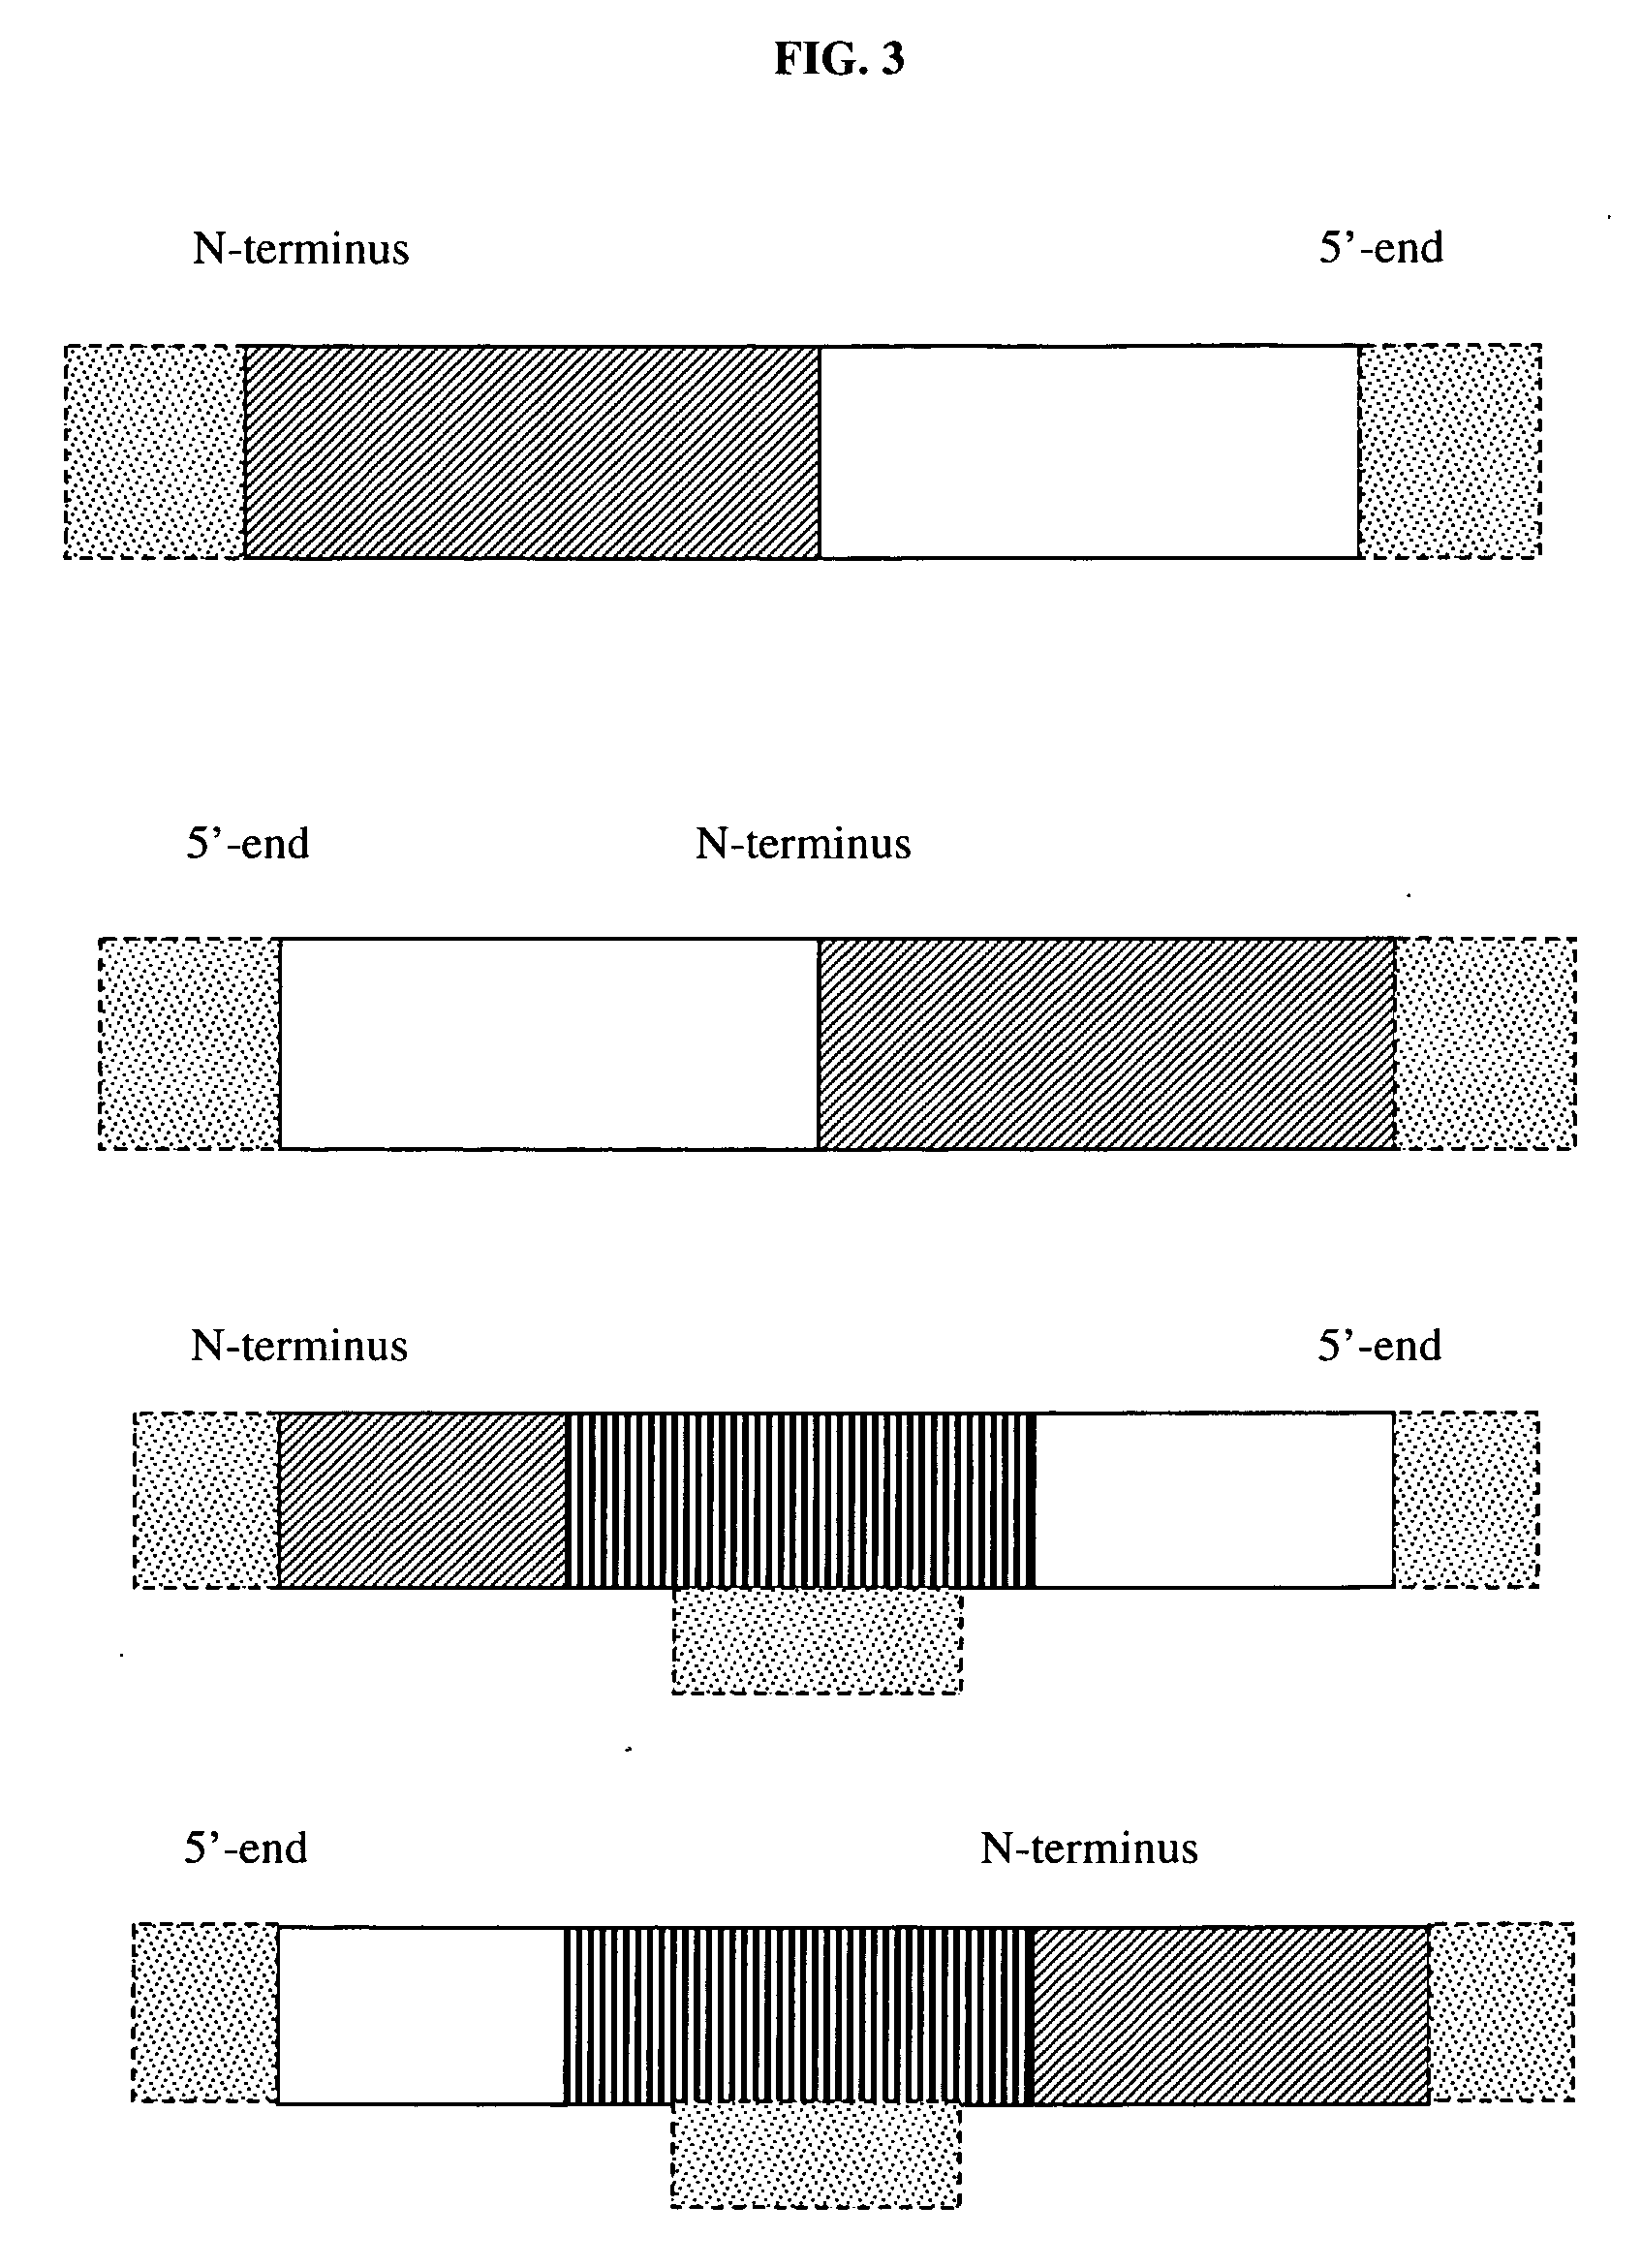 Therapeutic compositions and methods of using same